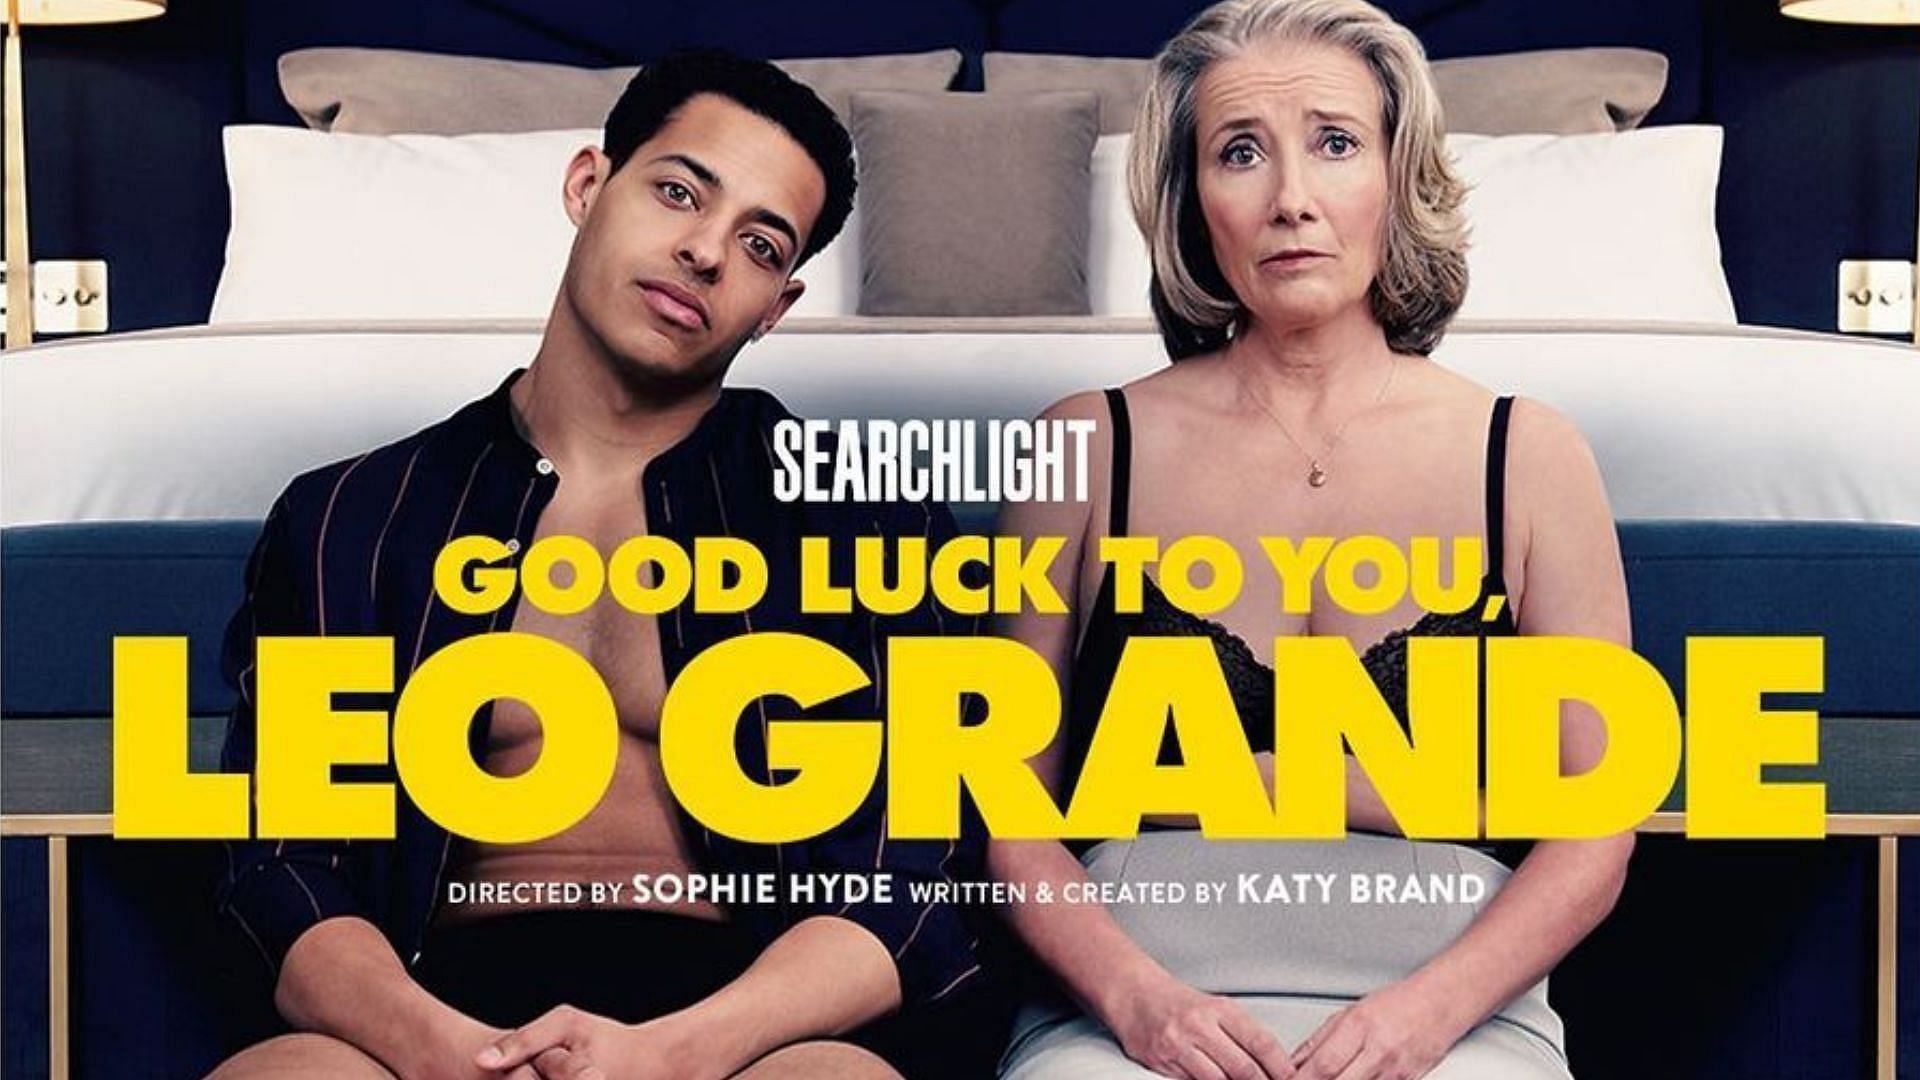 Good Luck to You, Leo Grande (Image via Searchlight Pictures)